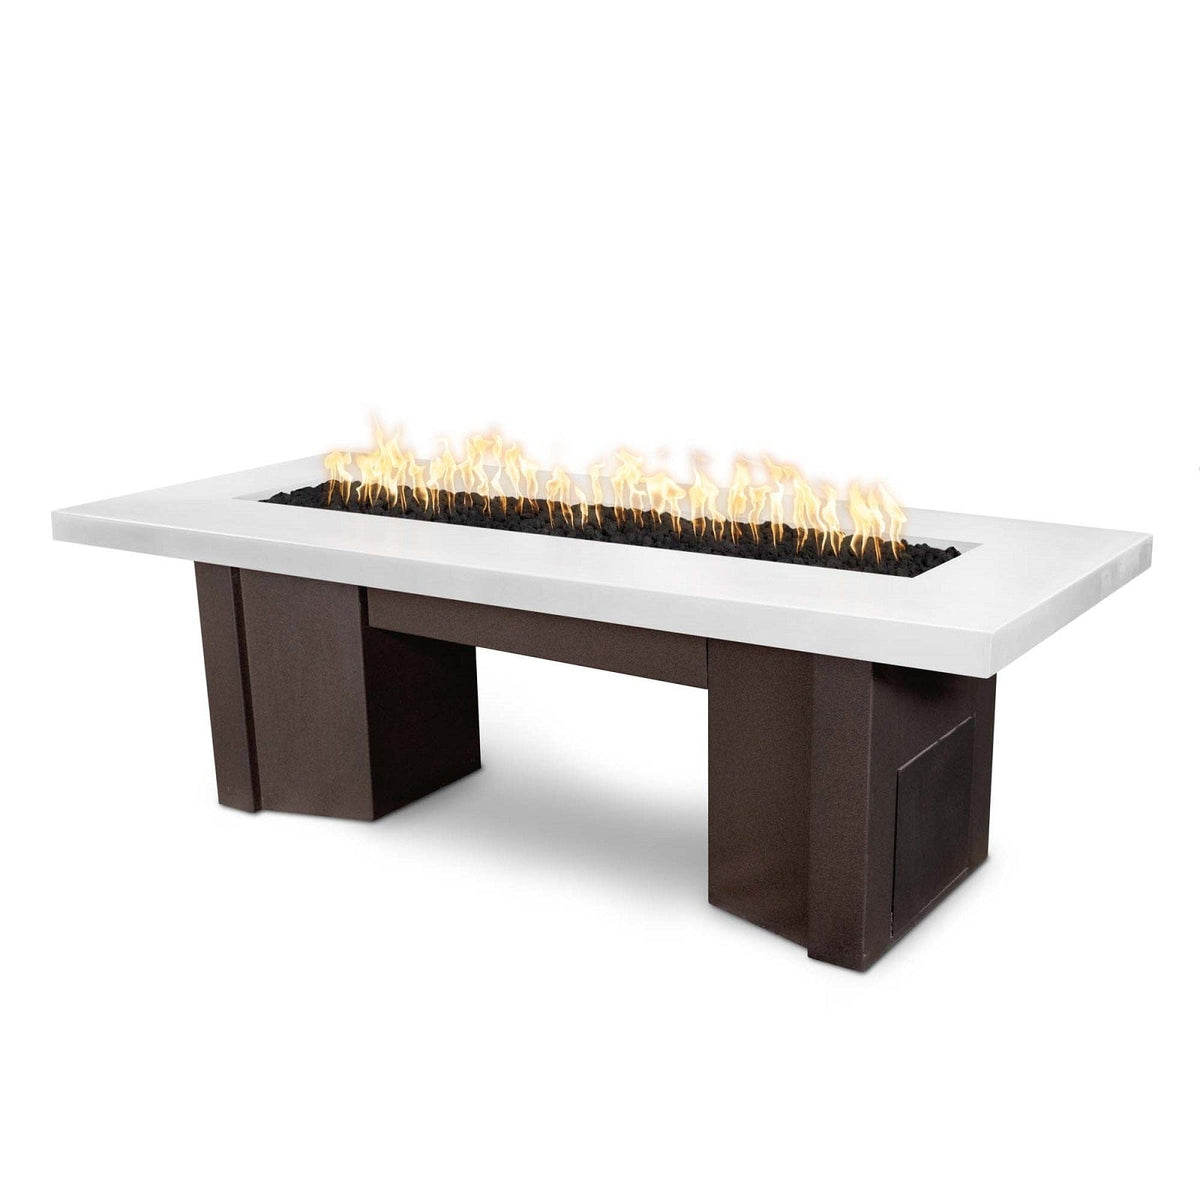 The Outdoor Plus Fire Features Limestone (-LIM) / Java Powder Coated Steel (-JAV) The Outdoor Plus 60&quot; Alameda Fire Table Smooth Concrete in Natural Gas - Flame Sense System with Push Button Spark Igniter / OPT-ALMGFRC60FSEN-NG